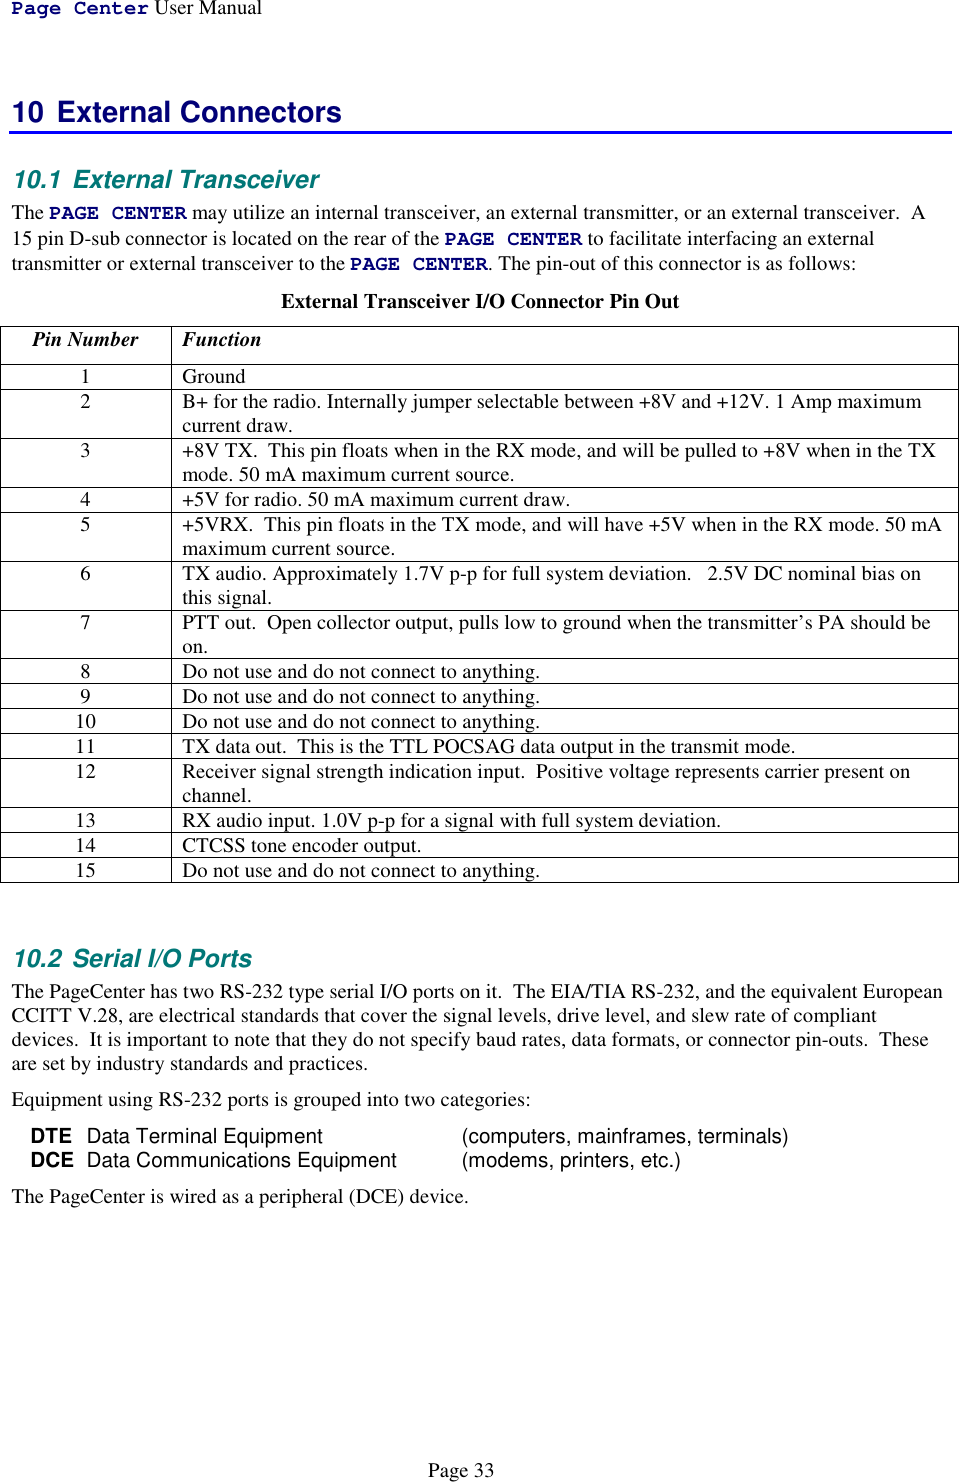 Page Center User ManualPage 3310 External Connectors10.1 External TransceiverThe PAGE CENTER may utilize an internal transceiver, an external transmitter, or an external transceiver.  A15 pin D-sub connector is located on the rear of the PAGE CENTER to facilitate interfacing an externaltransmitter or external transceiver to the PAGE CENTER. The pin-out of this connector is as follows:External Transceiver I/O Connector Pin OutPin Number Function1 Ground2 B+ for the radio. Internally jumper selectable between +8V and +12V. 1 Amp maximumcurrent draw.3 +8V TX.  This pin floats when in the RX mode, and will be pulled to +8V when in the TXmode. 50 mA maximum current source.4 +5V for radio. 50 mA maximum current draw.5 +5VRX.  This pin floats in the TX mode, and will have +5V when in the RX mode. 50 mAmaximum current source.6 TX audio. Approximately 1.7V p-p for full system deviation.   2.5V DC nominal bias onthis signal.7 PTT out.  Open collector output, pulls low to ground when the transmitter’s PA should beon.8 Do not use and do not connect to anything.9 Do not use and do not connect to anything.10 Do not use and do not connect to anything.11 TX data out.  This is the TTL POCSAG data output in the transmit mode.12 Receiver signal strength indication input.  Positive voltage represents carrier present onchannel.13 RX audio input. 1.0V p-p for a signal with full system deviation.14 CTCSS tone encoder output.15 Do not use and do not connect to anything.10.2  Serial I/O PortsThe PageCenter has two RS-232 type serial I/O ports on it.  The EIA/TIA RS-232, and the equivalent EuropeanCCITT V.28, are electrical standards that cover the signal levels, drive level, and slew rate of compliantdevices.  It is important to note that they do not specify baud rates, data formats, or connector pin-outs.  Theseare set by industry standards and practices.Equipment using RS-232 ports is grouped into two categories:DTE Data Terminal Equipment  (computers, mainframes, terminals)DCE Data Communications Equipment  (modems, printers, etc.)The PageCenter is wired as a peripheral (DCE) device.